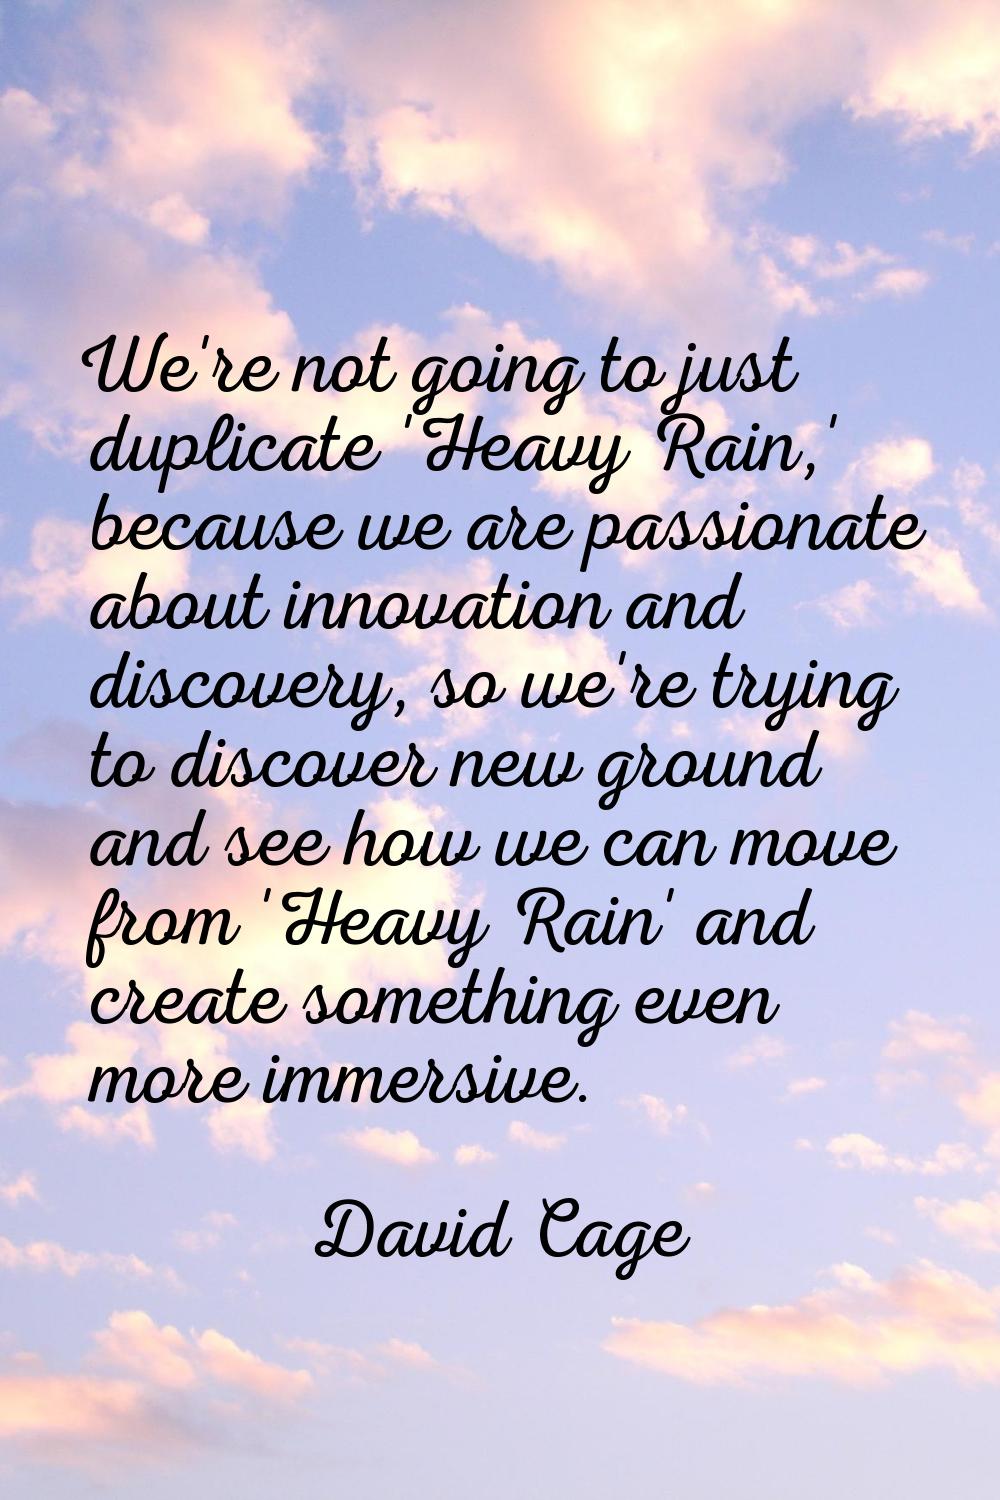 We're not going to just duplicate 'Heavy Rain,' because we are passionate about innovation and disc